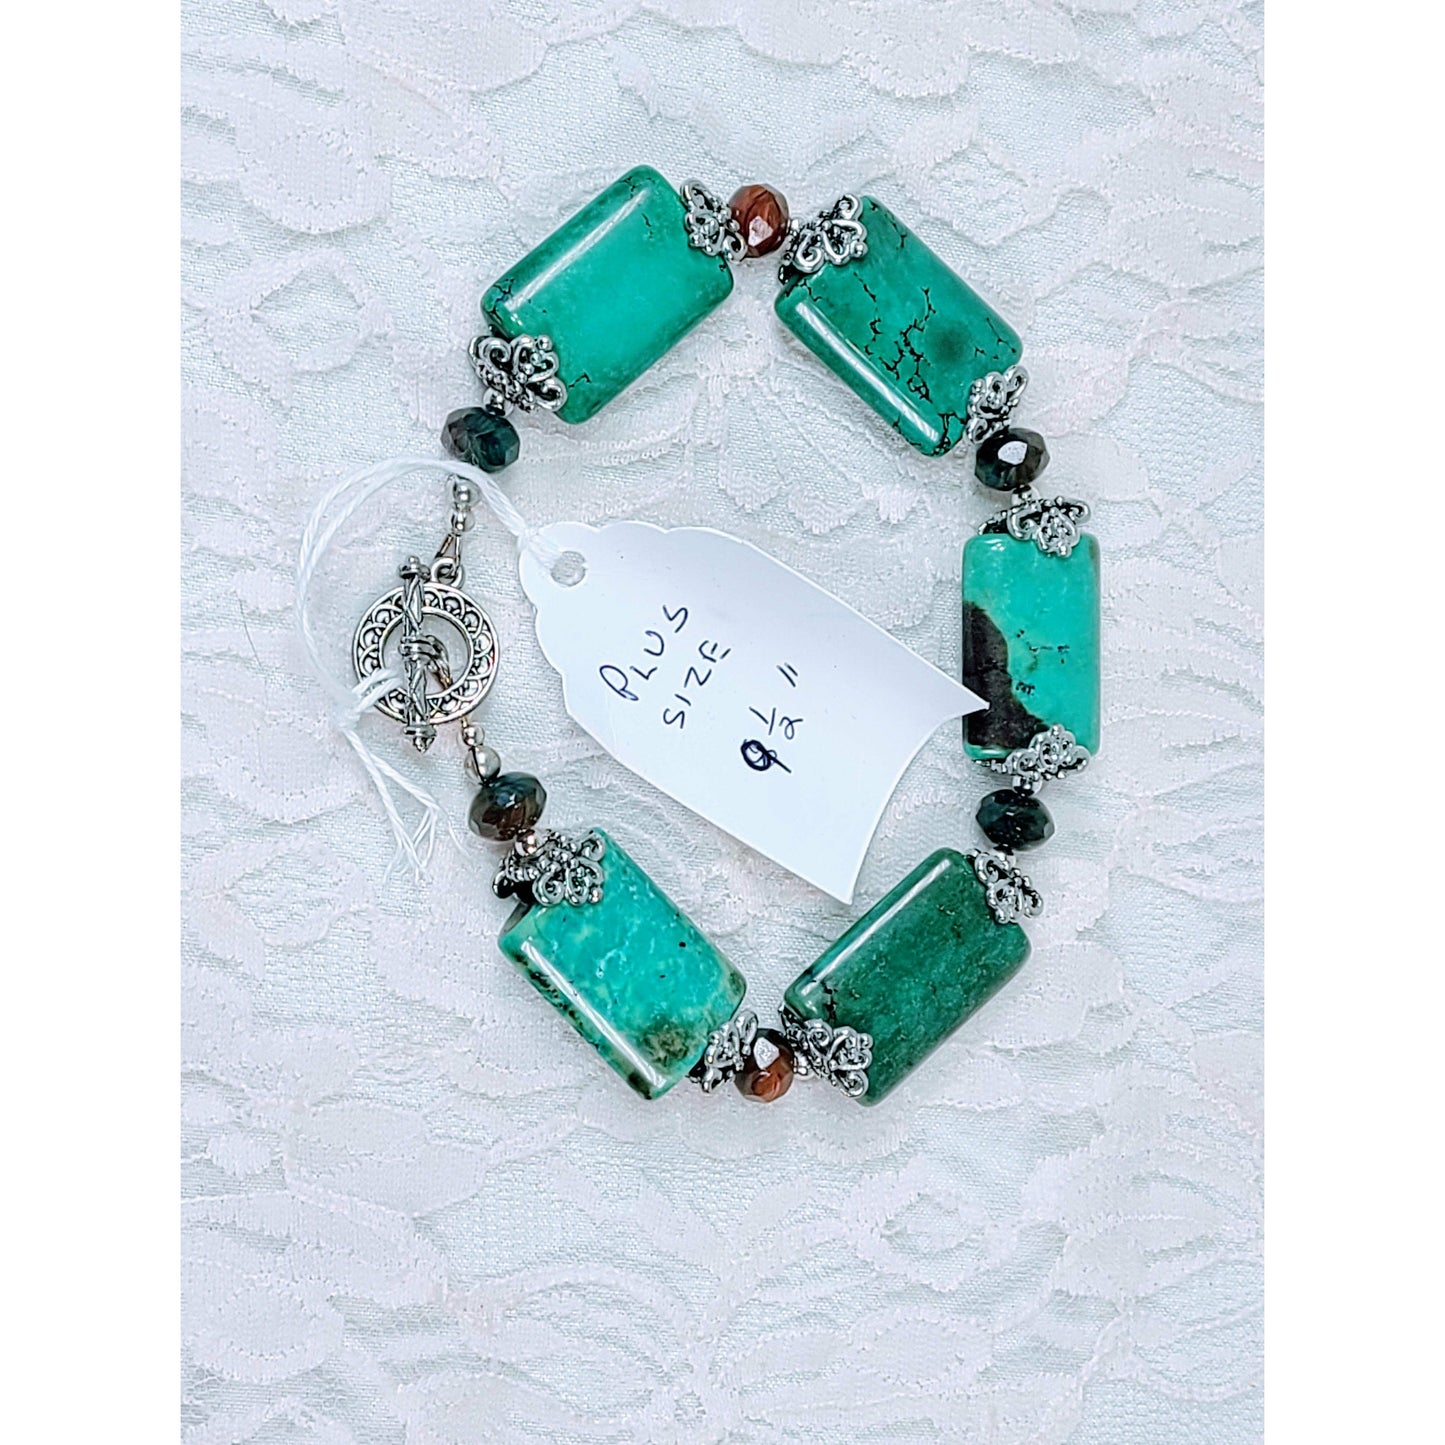 Plus Size Bracelet ~ Large Blue Green Chrysoprase Beads and Amber Czech Glass Beads & Sterling Silver Bali Bead Accents